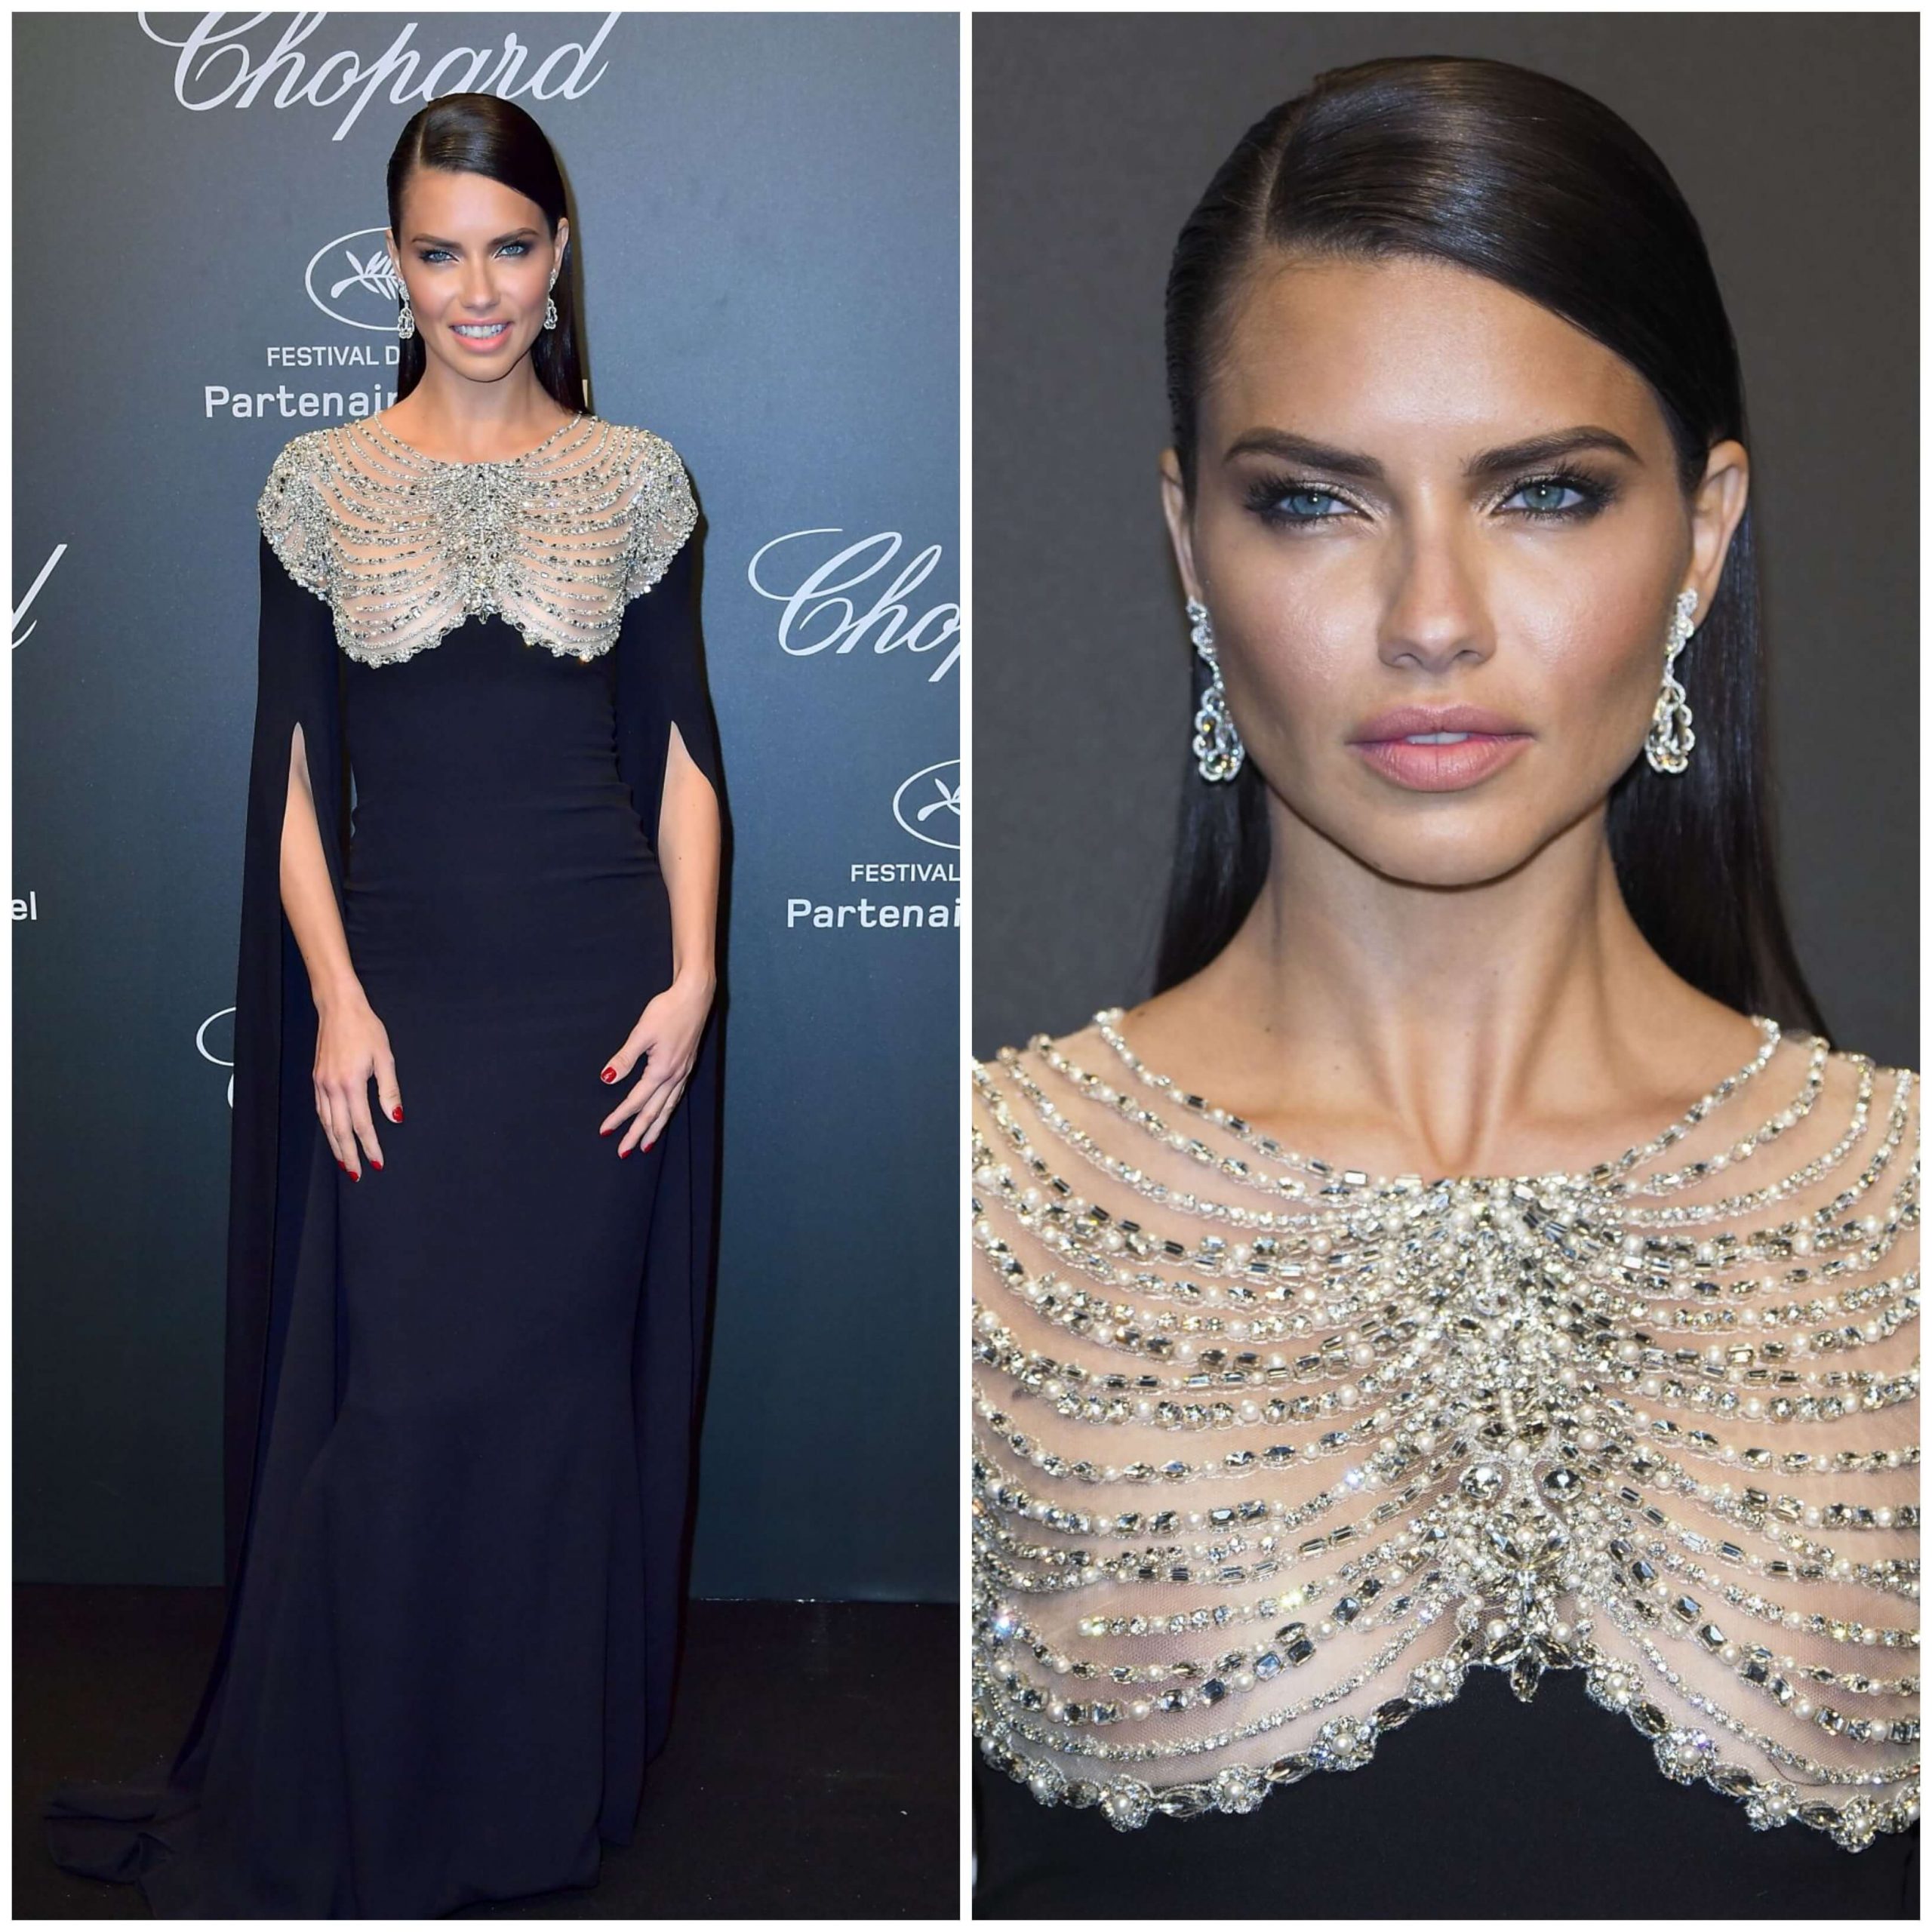 Adriana Lima Beautiful Look In Black Floor-Sweeping Gown With Crystals & Long Cape Style Sleeves